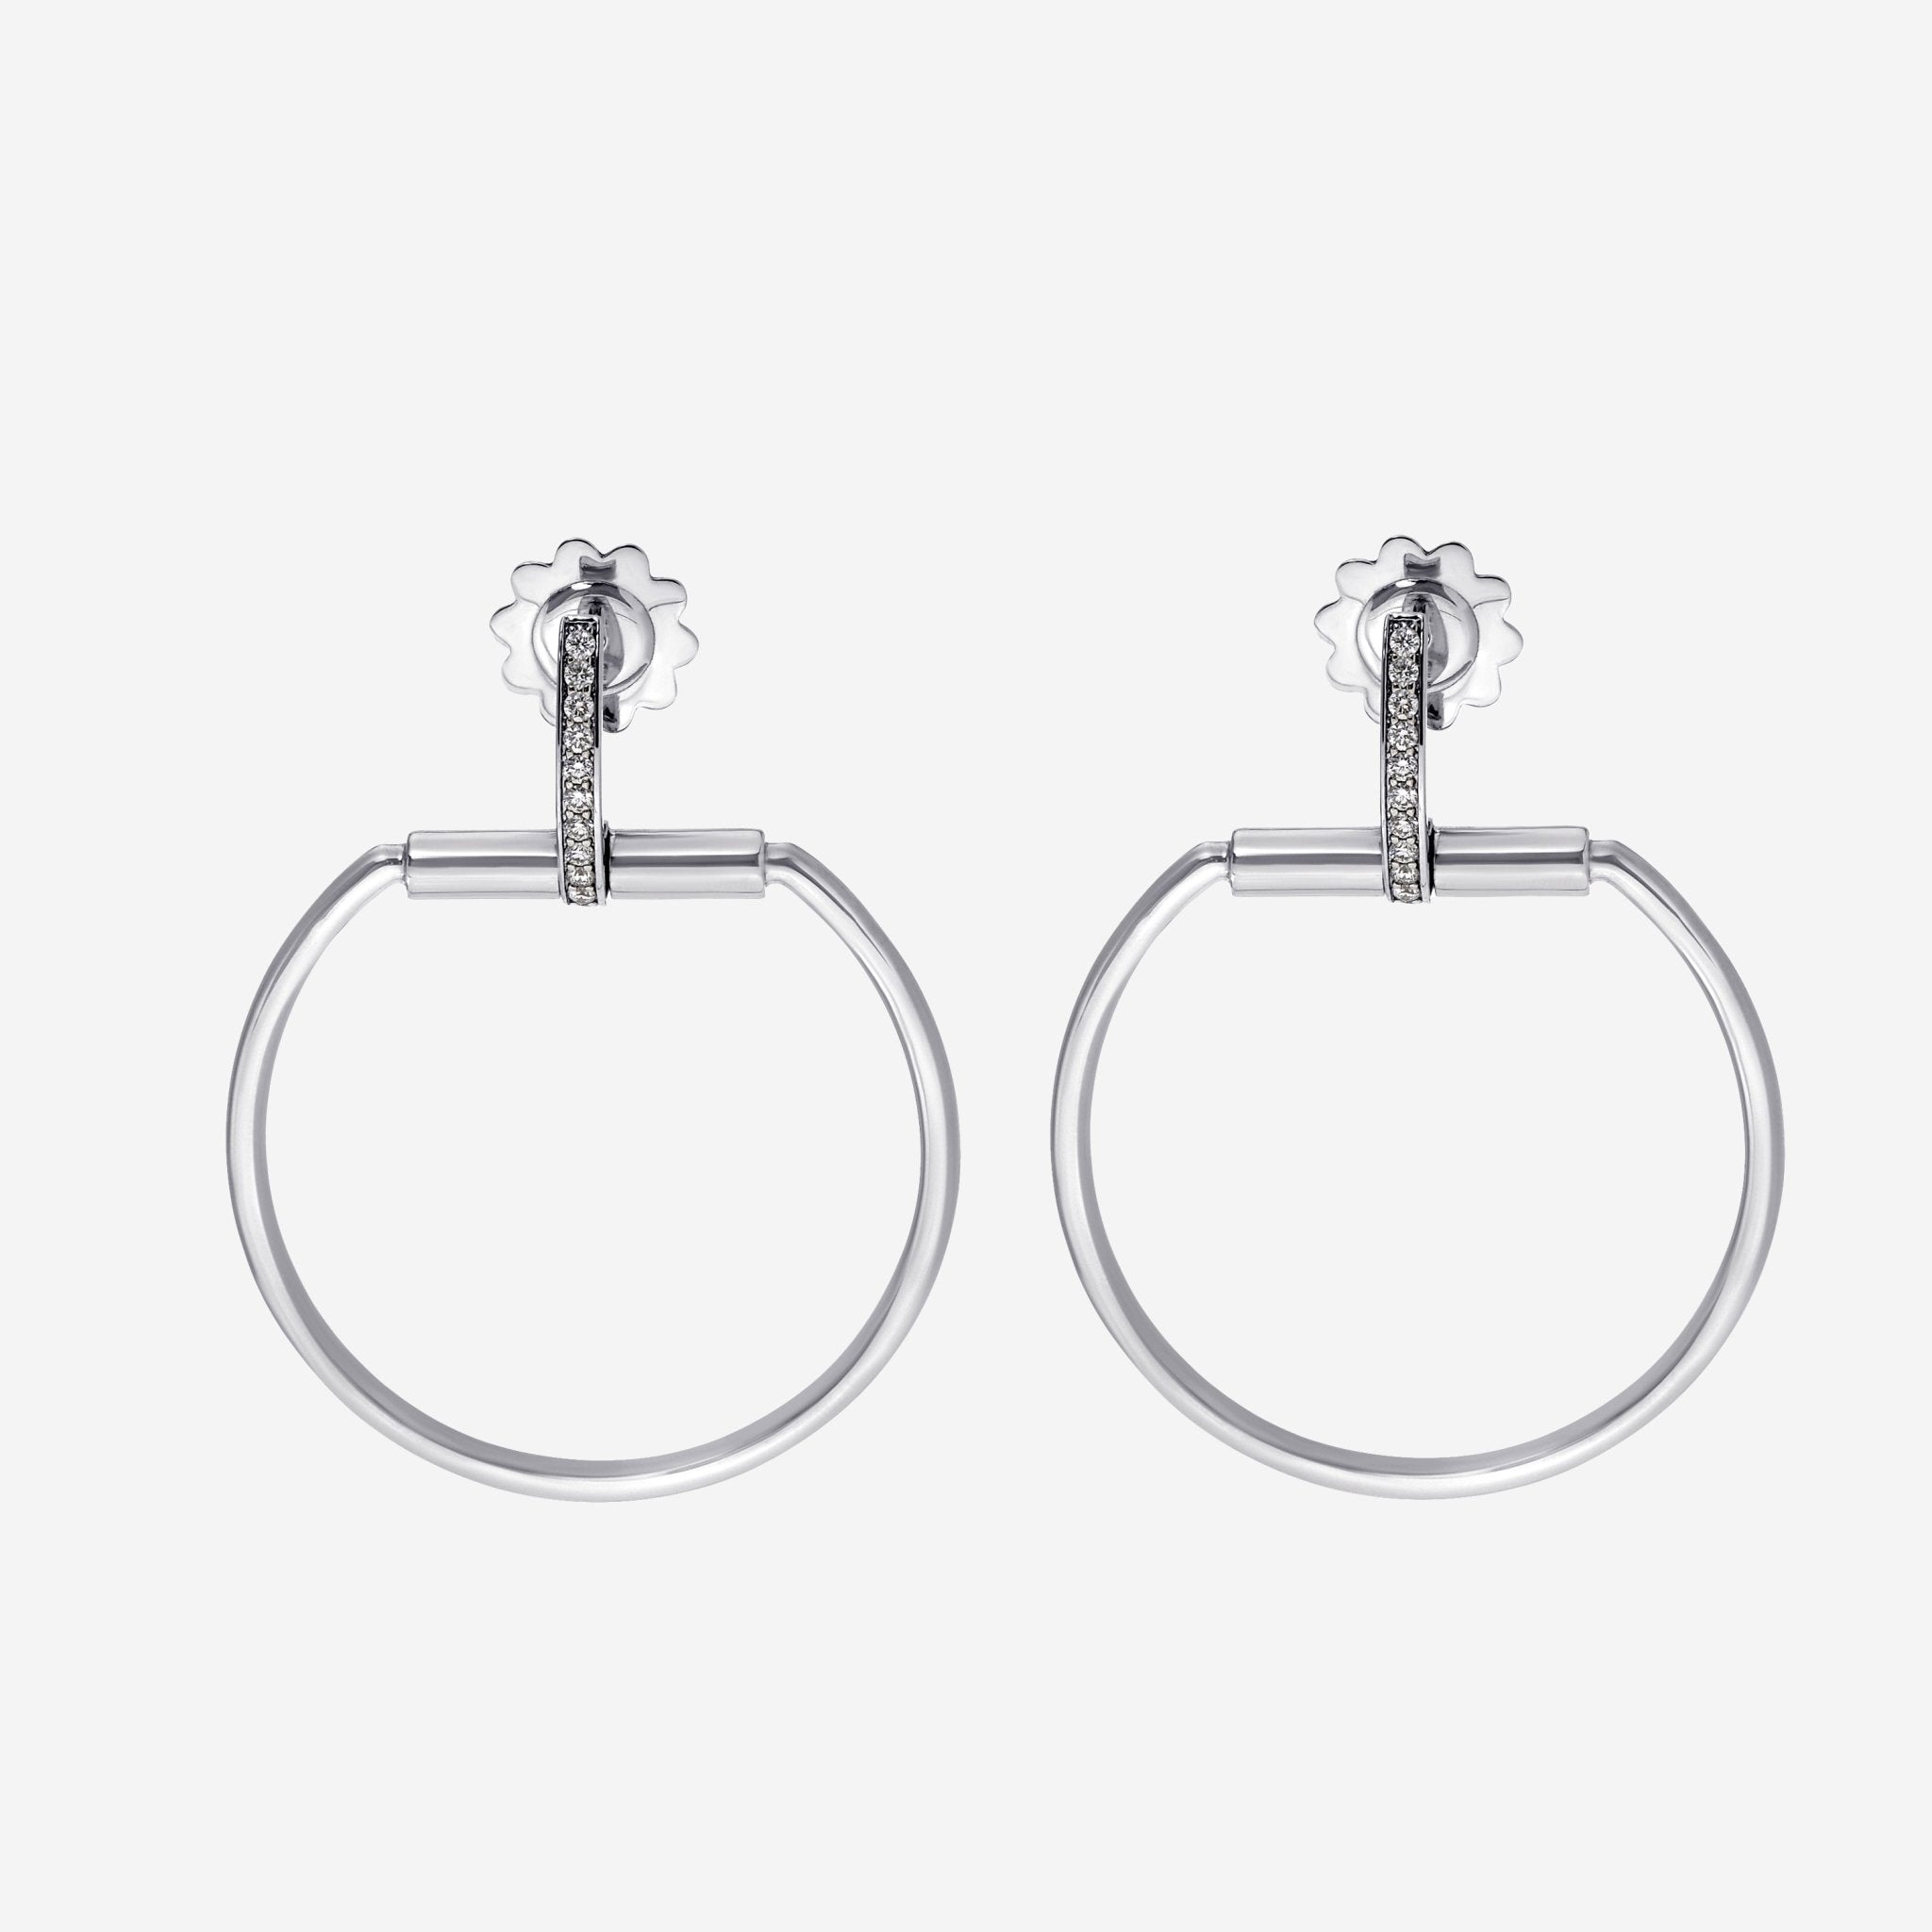 Roberto Coin 18K White Gold Classic Parisienne Drop Earrings 8882383AWERX - THE SOLIST - Roberto Coin